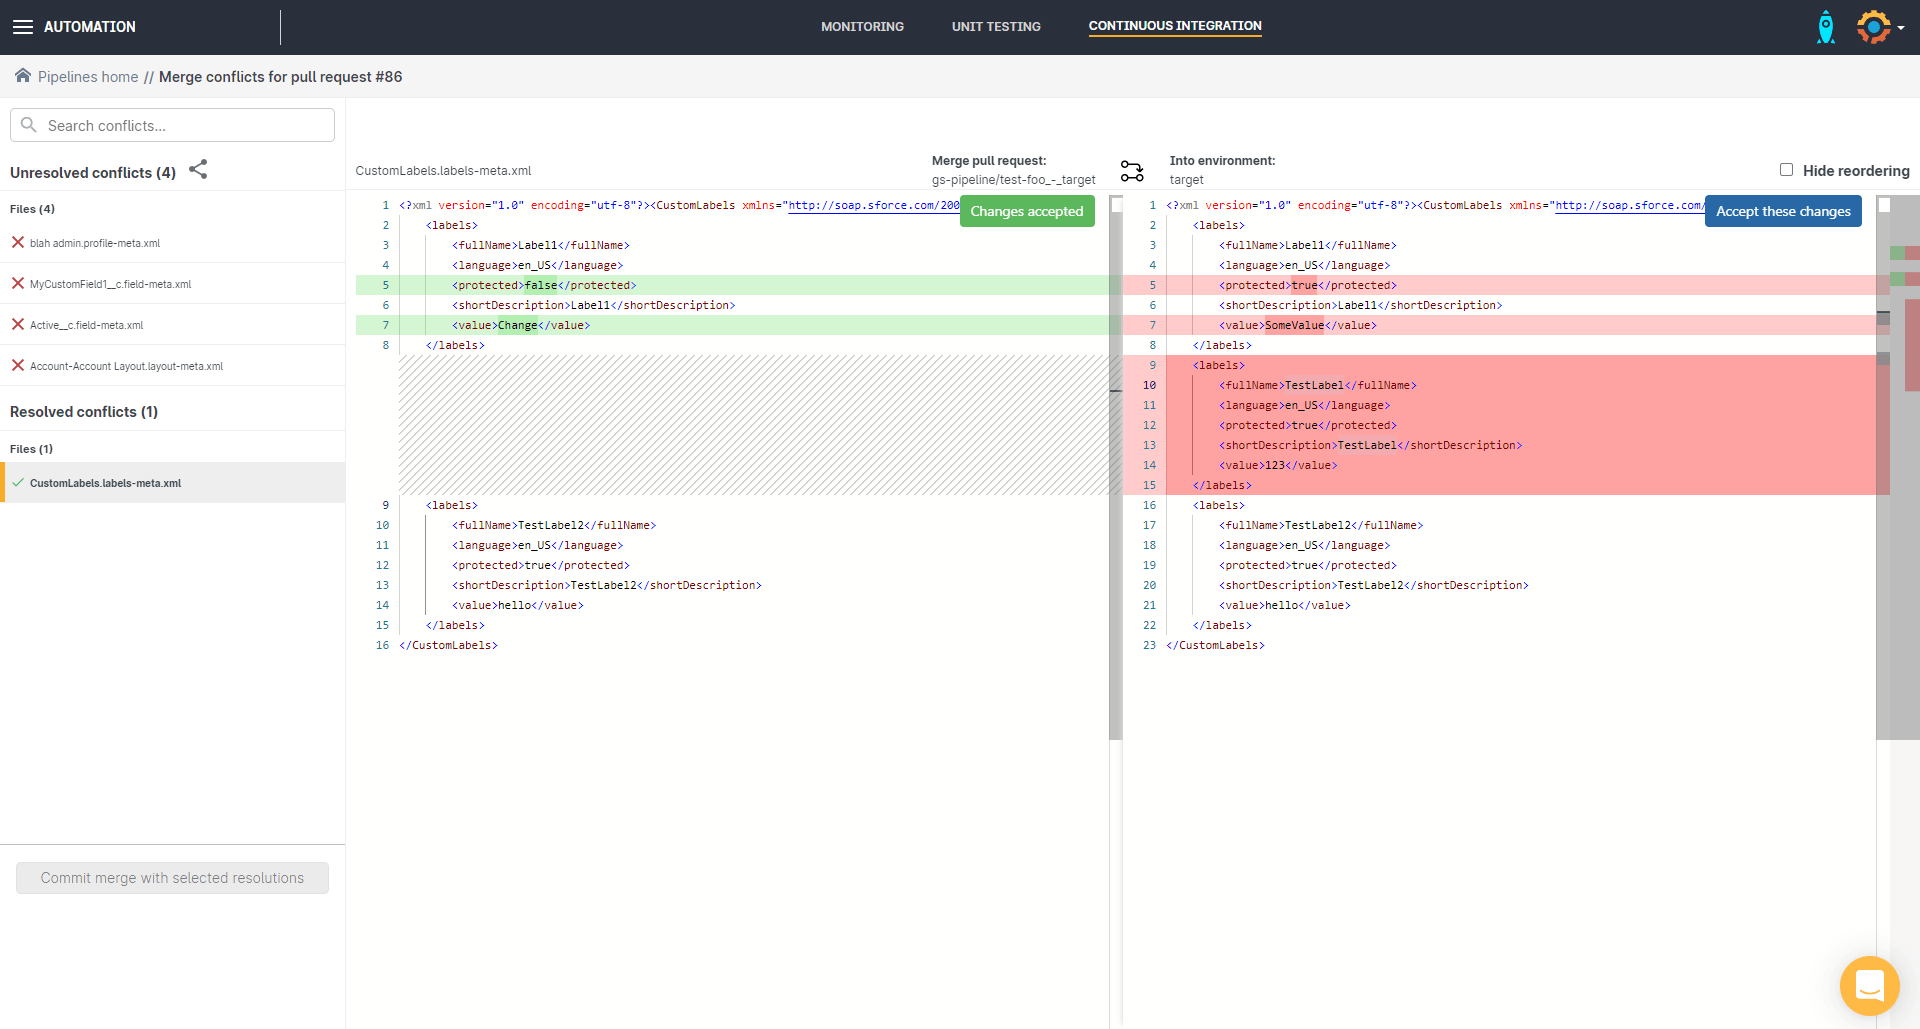 Resolve merge conflicts in Gearset